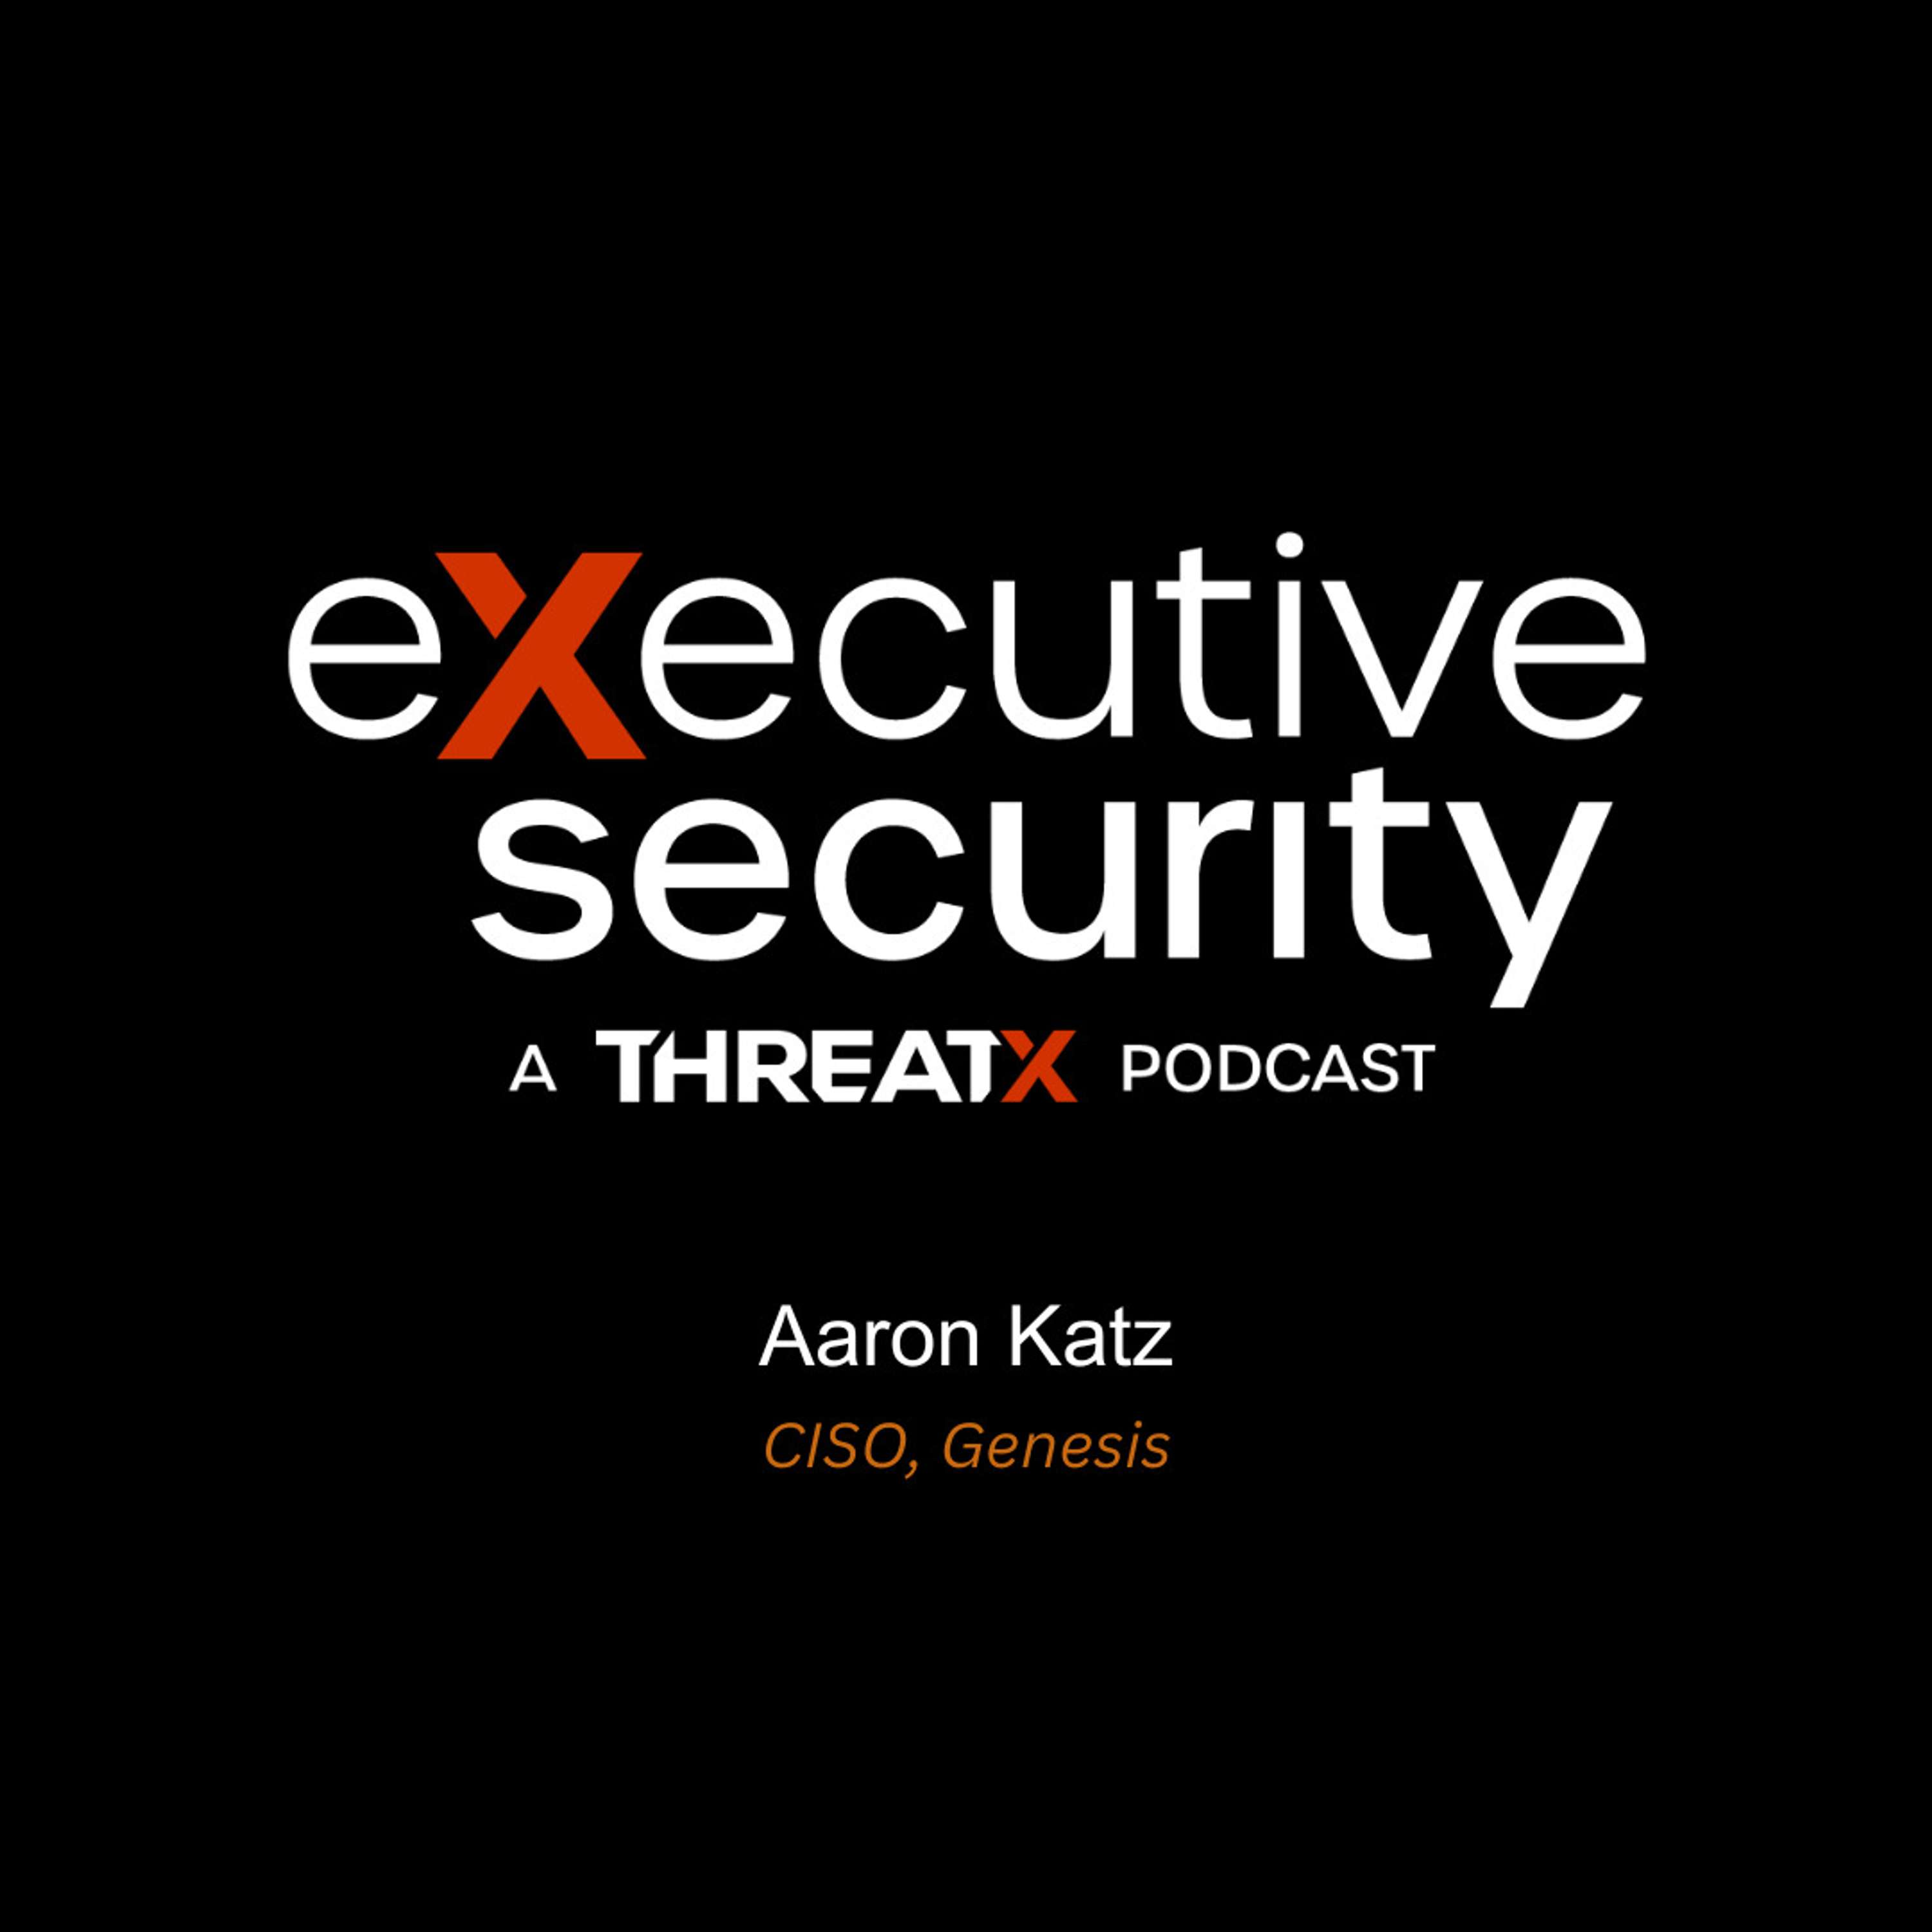 Are You Asking the Right Questions? With CISO Aaron Katz